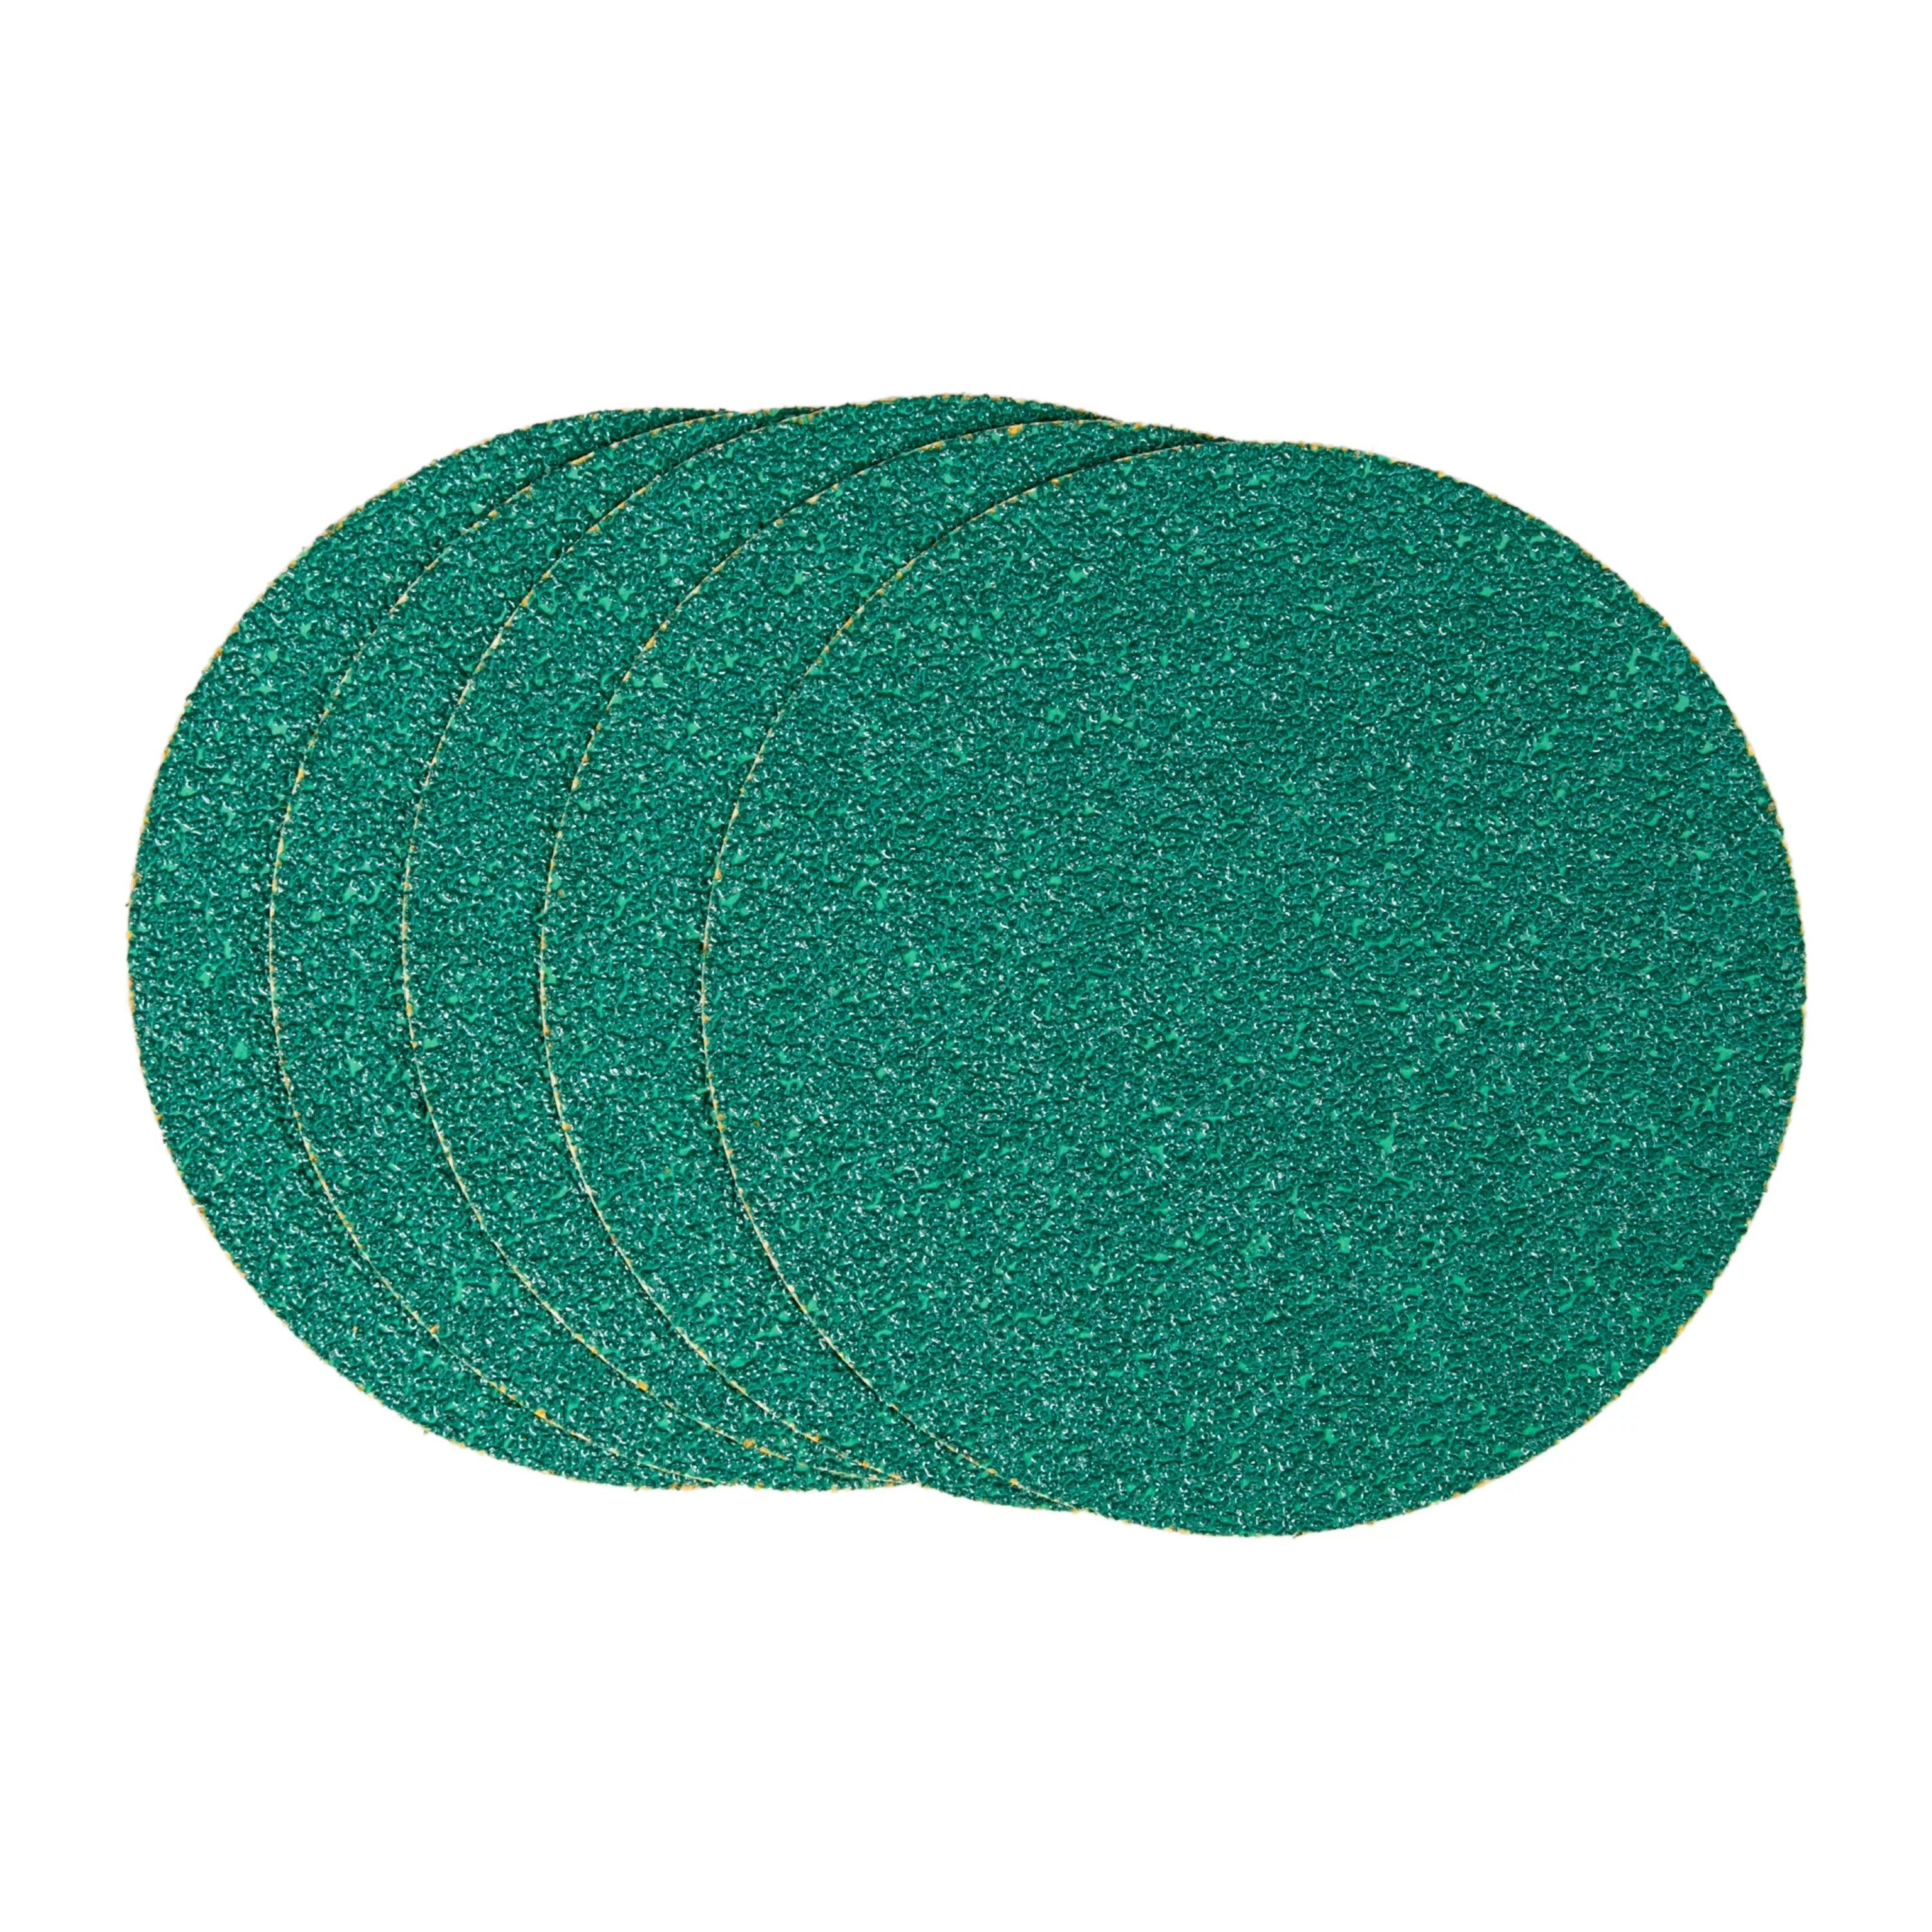 SKU 7010363422 | 3M™ Green Corps™ Sanding Disc with Stikit™ Attachment